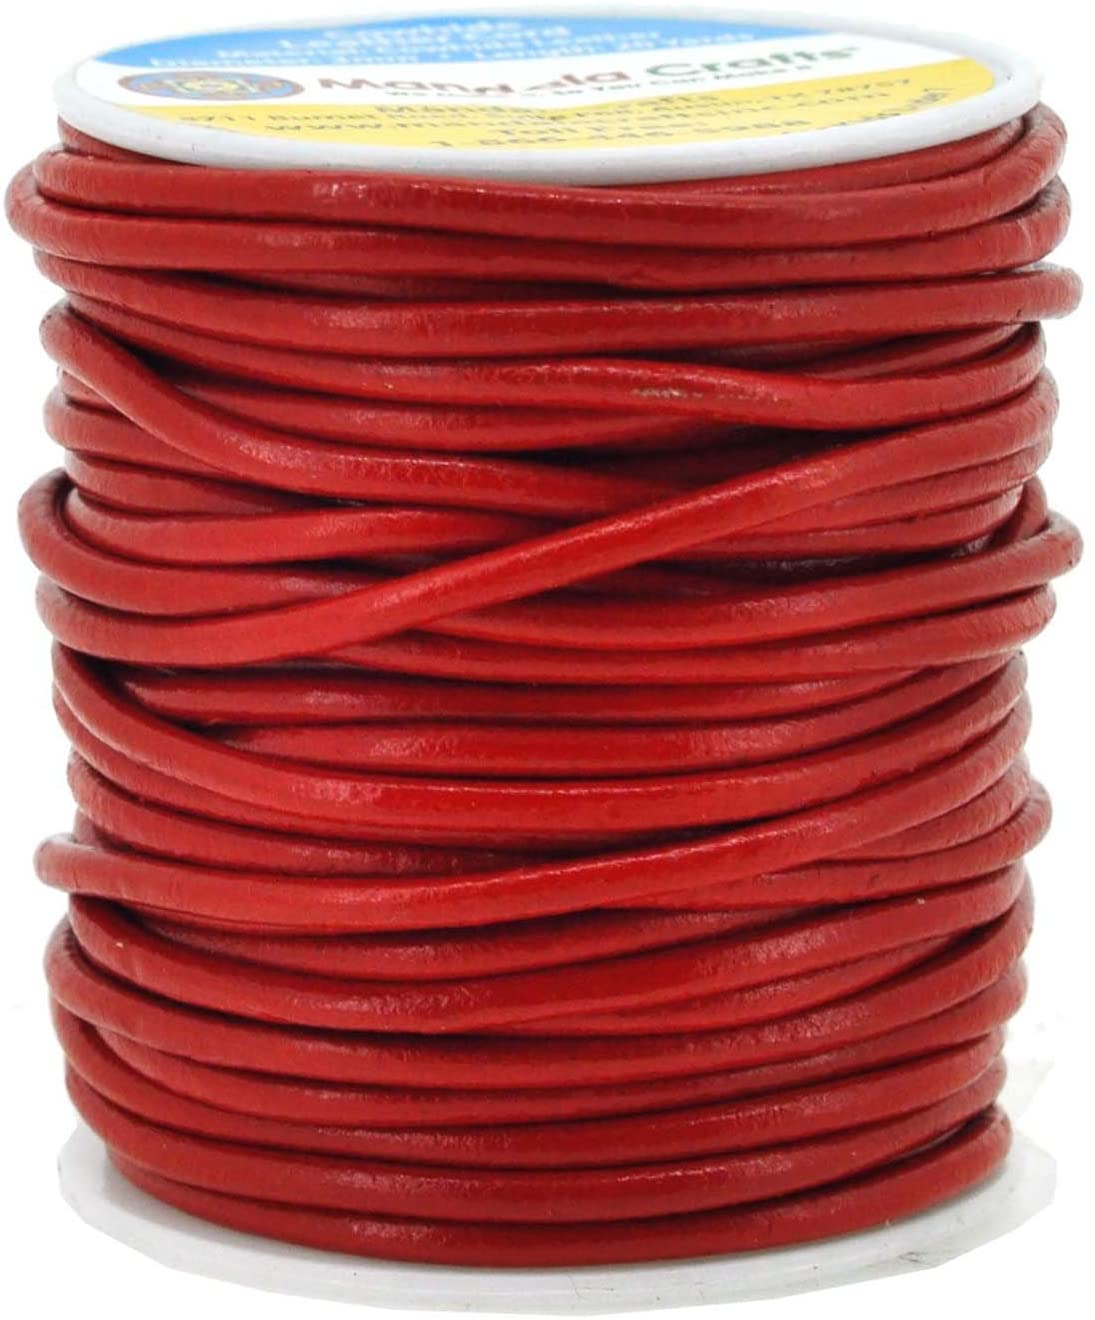 Round Rawhide Leather Cord 2mm 8 yds - $4.35 : Fundametals, Essential tools  for creating wire and metal jewelry.